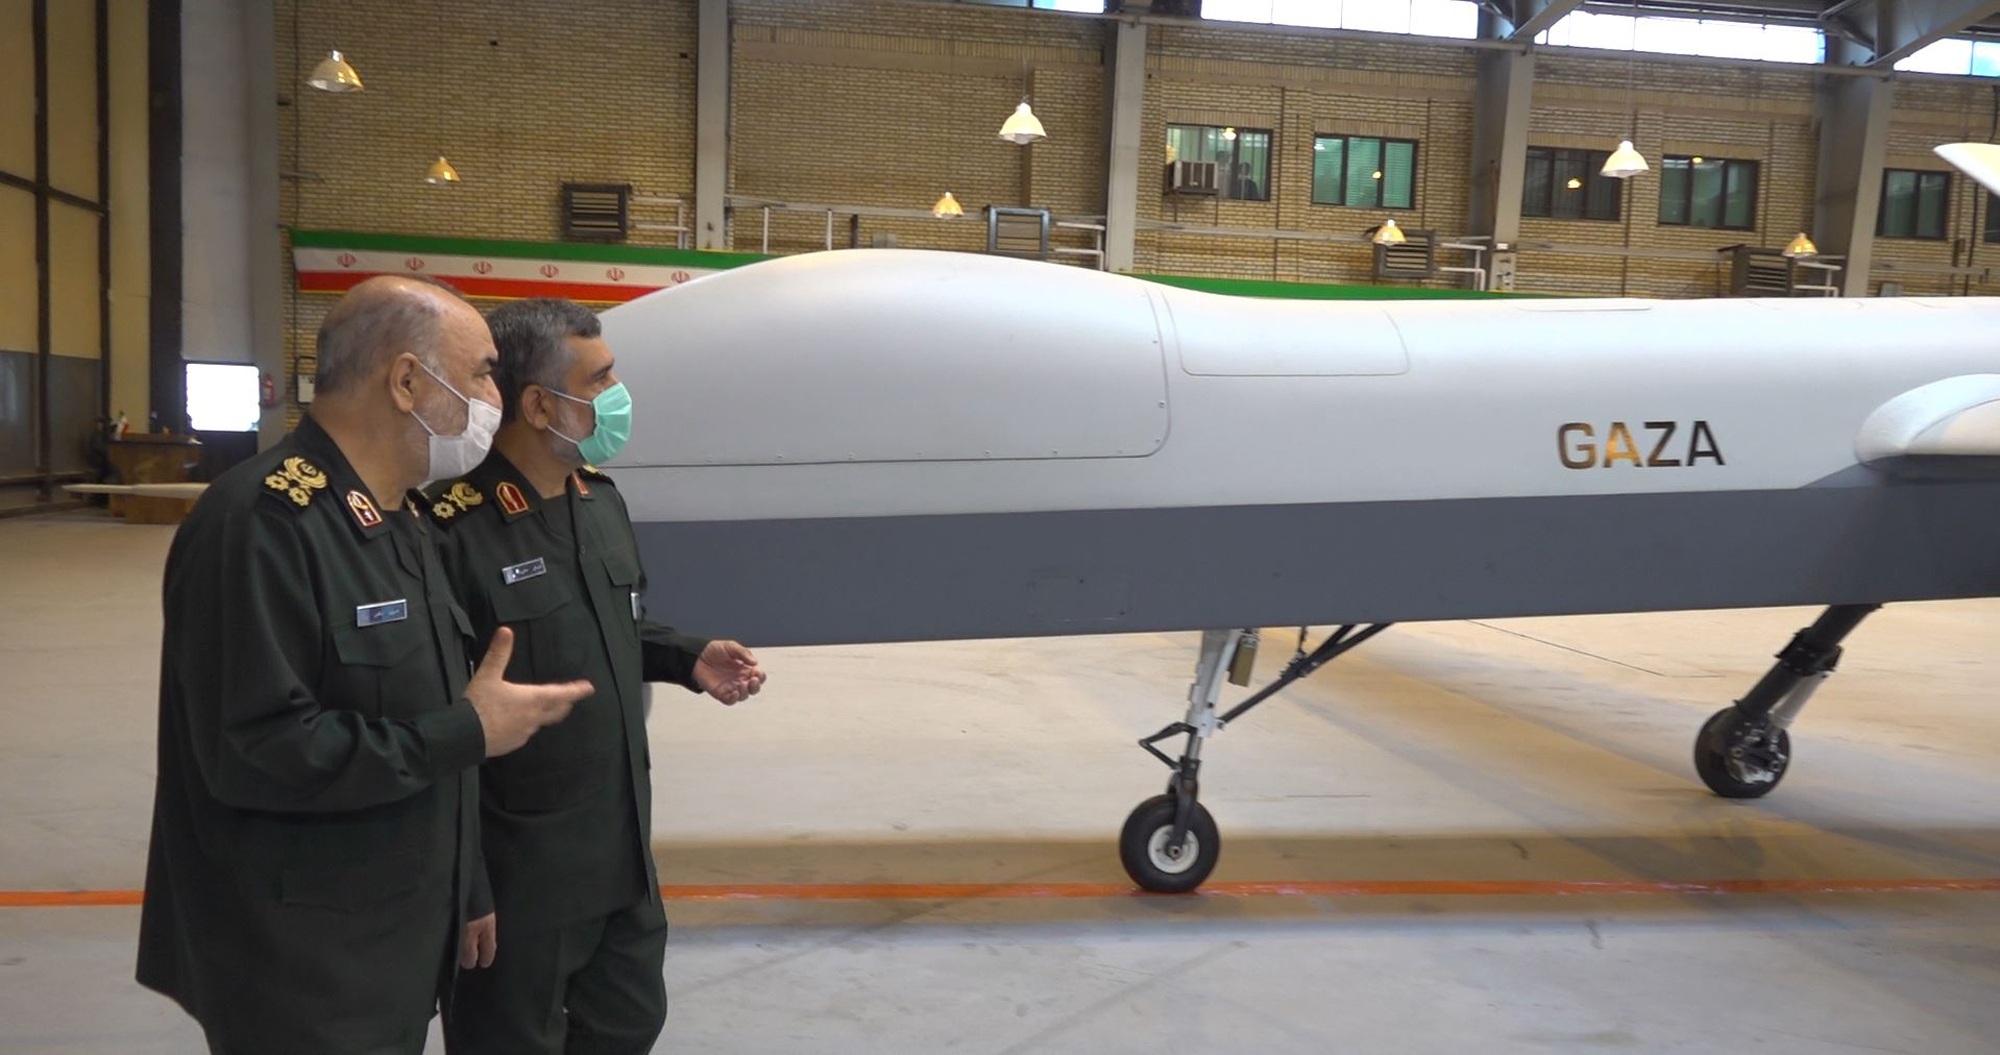 Iran to deliver armed drones to Russia for Ukraine war, White House says |  The Times of Israel